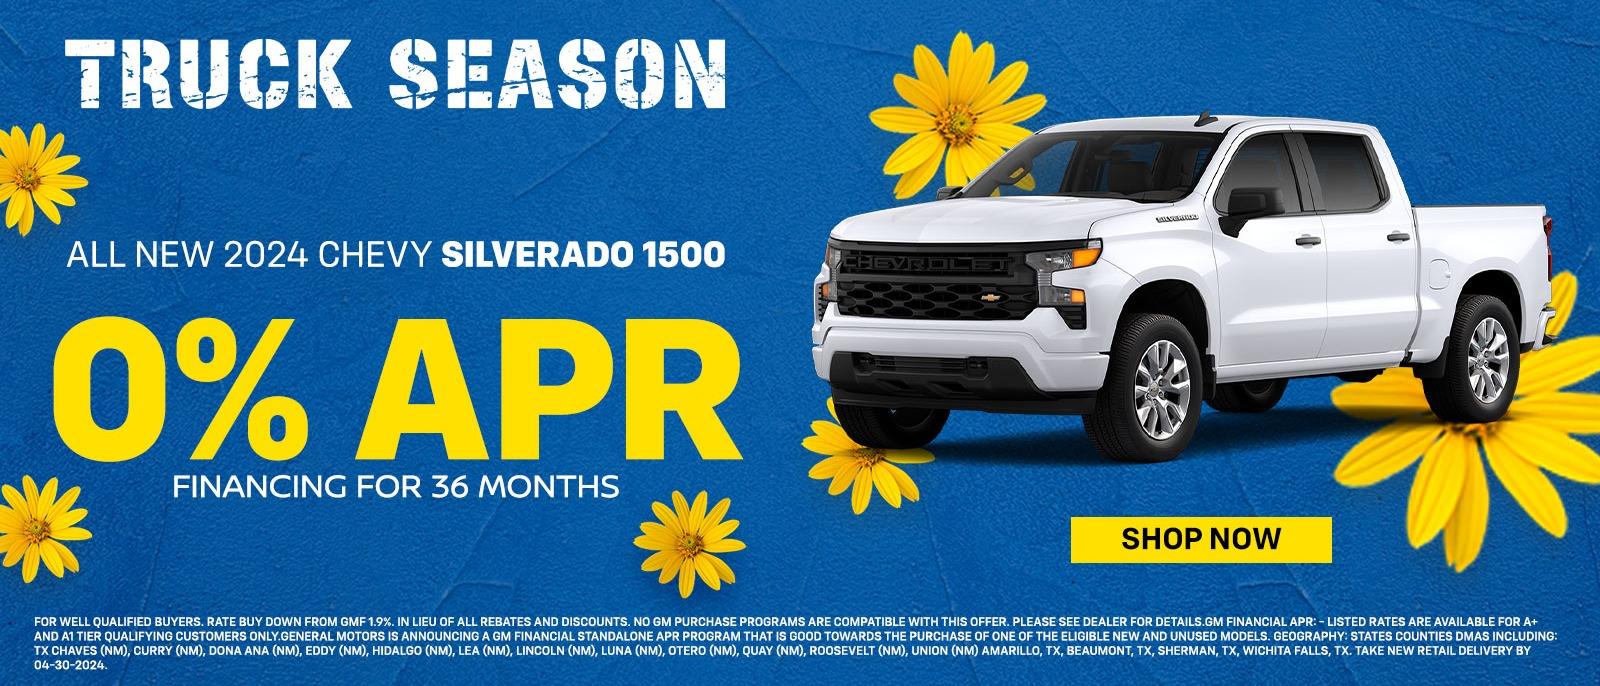 All new 2024 Chevrolet Silverado 1500
0% APR Financing
For 36 Months